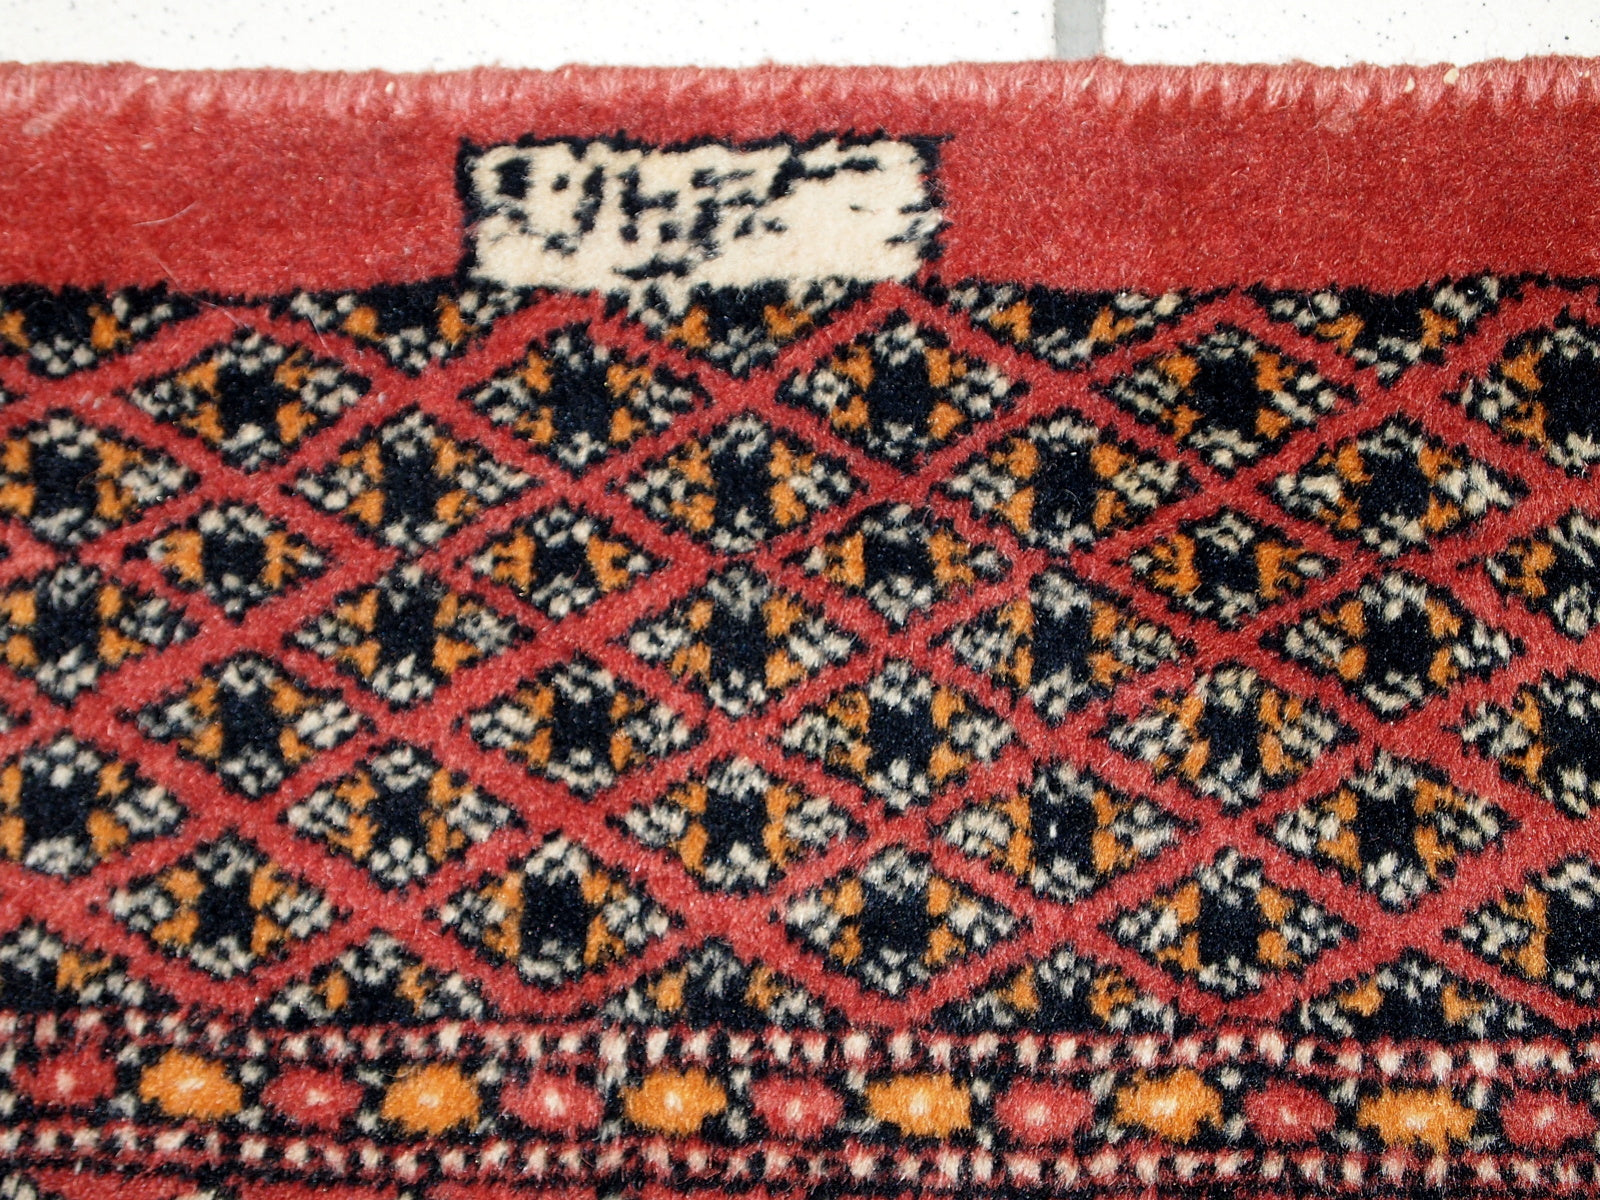 Detailed Shot of Tribal Figures on the Rug